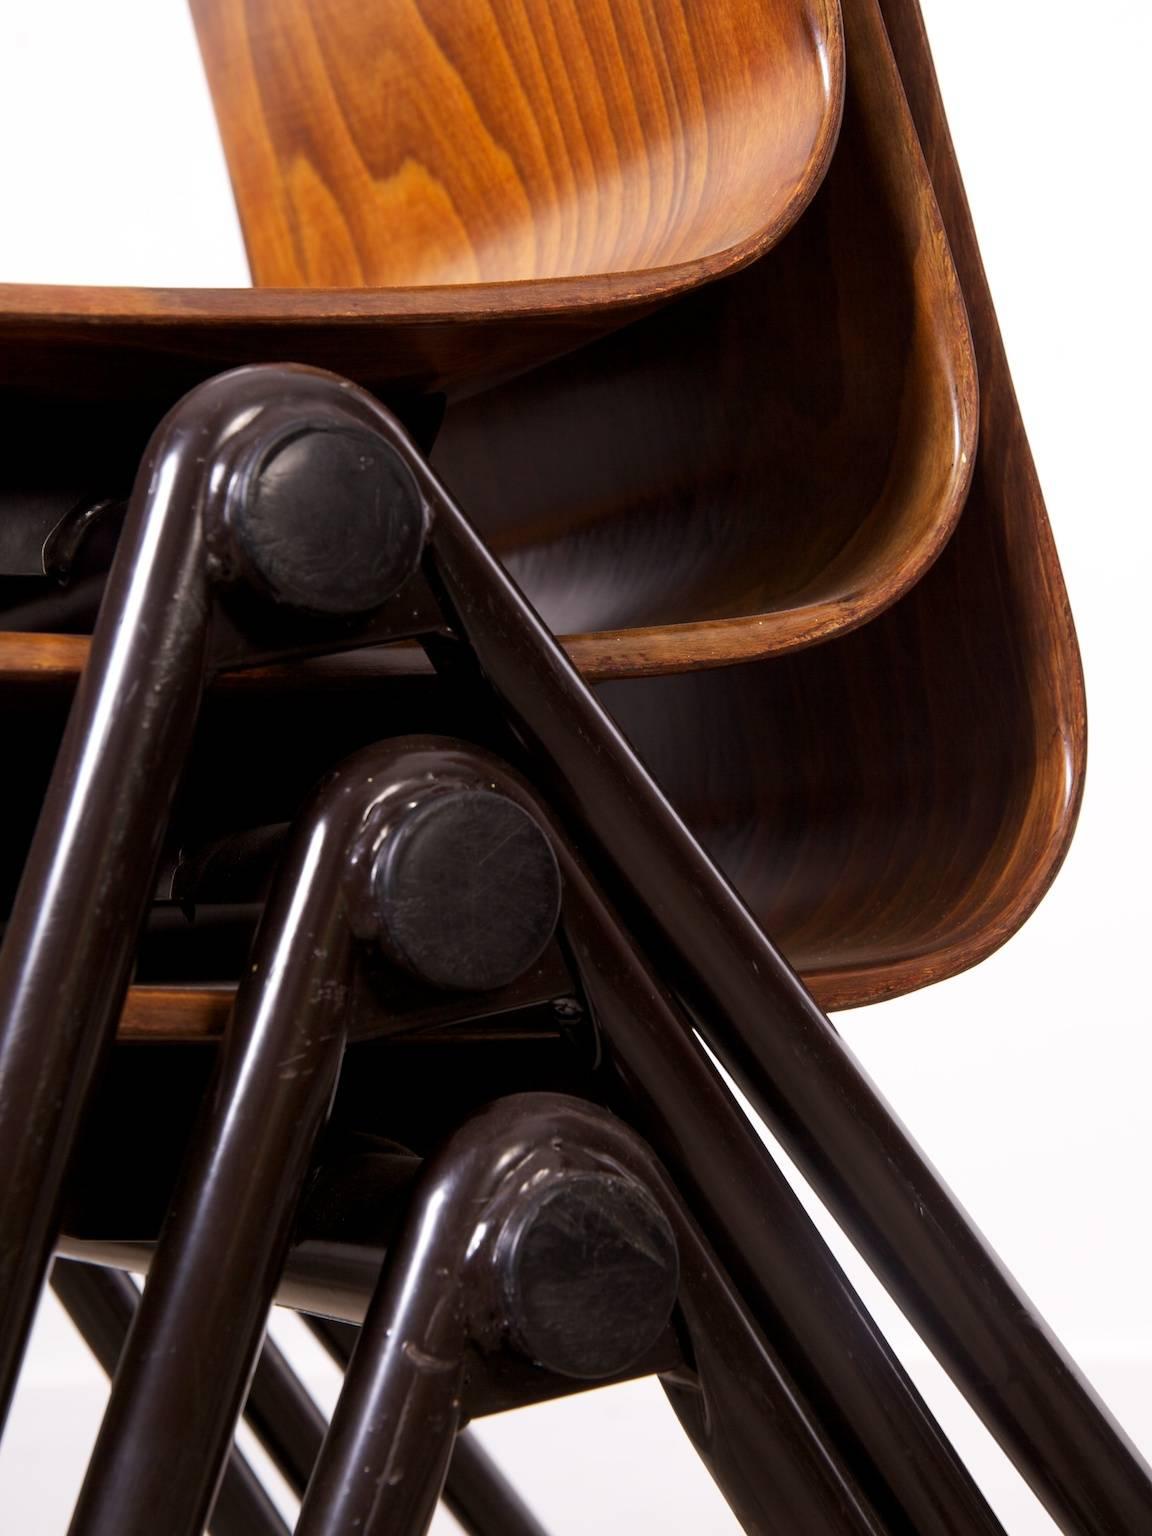 Six hairpin legged stacking chairs with moulded resin and timber seats.

Thur-Op-Seat chairs with stackable metal frame. These Industrial school or dining room chairs were made at Galvanitas, Netherlands (see logo G). They were created because of